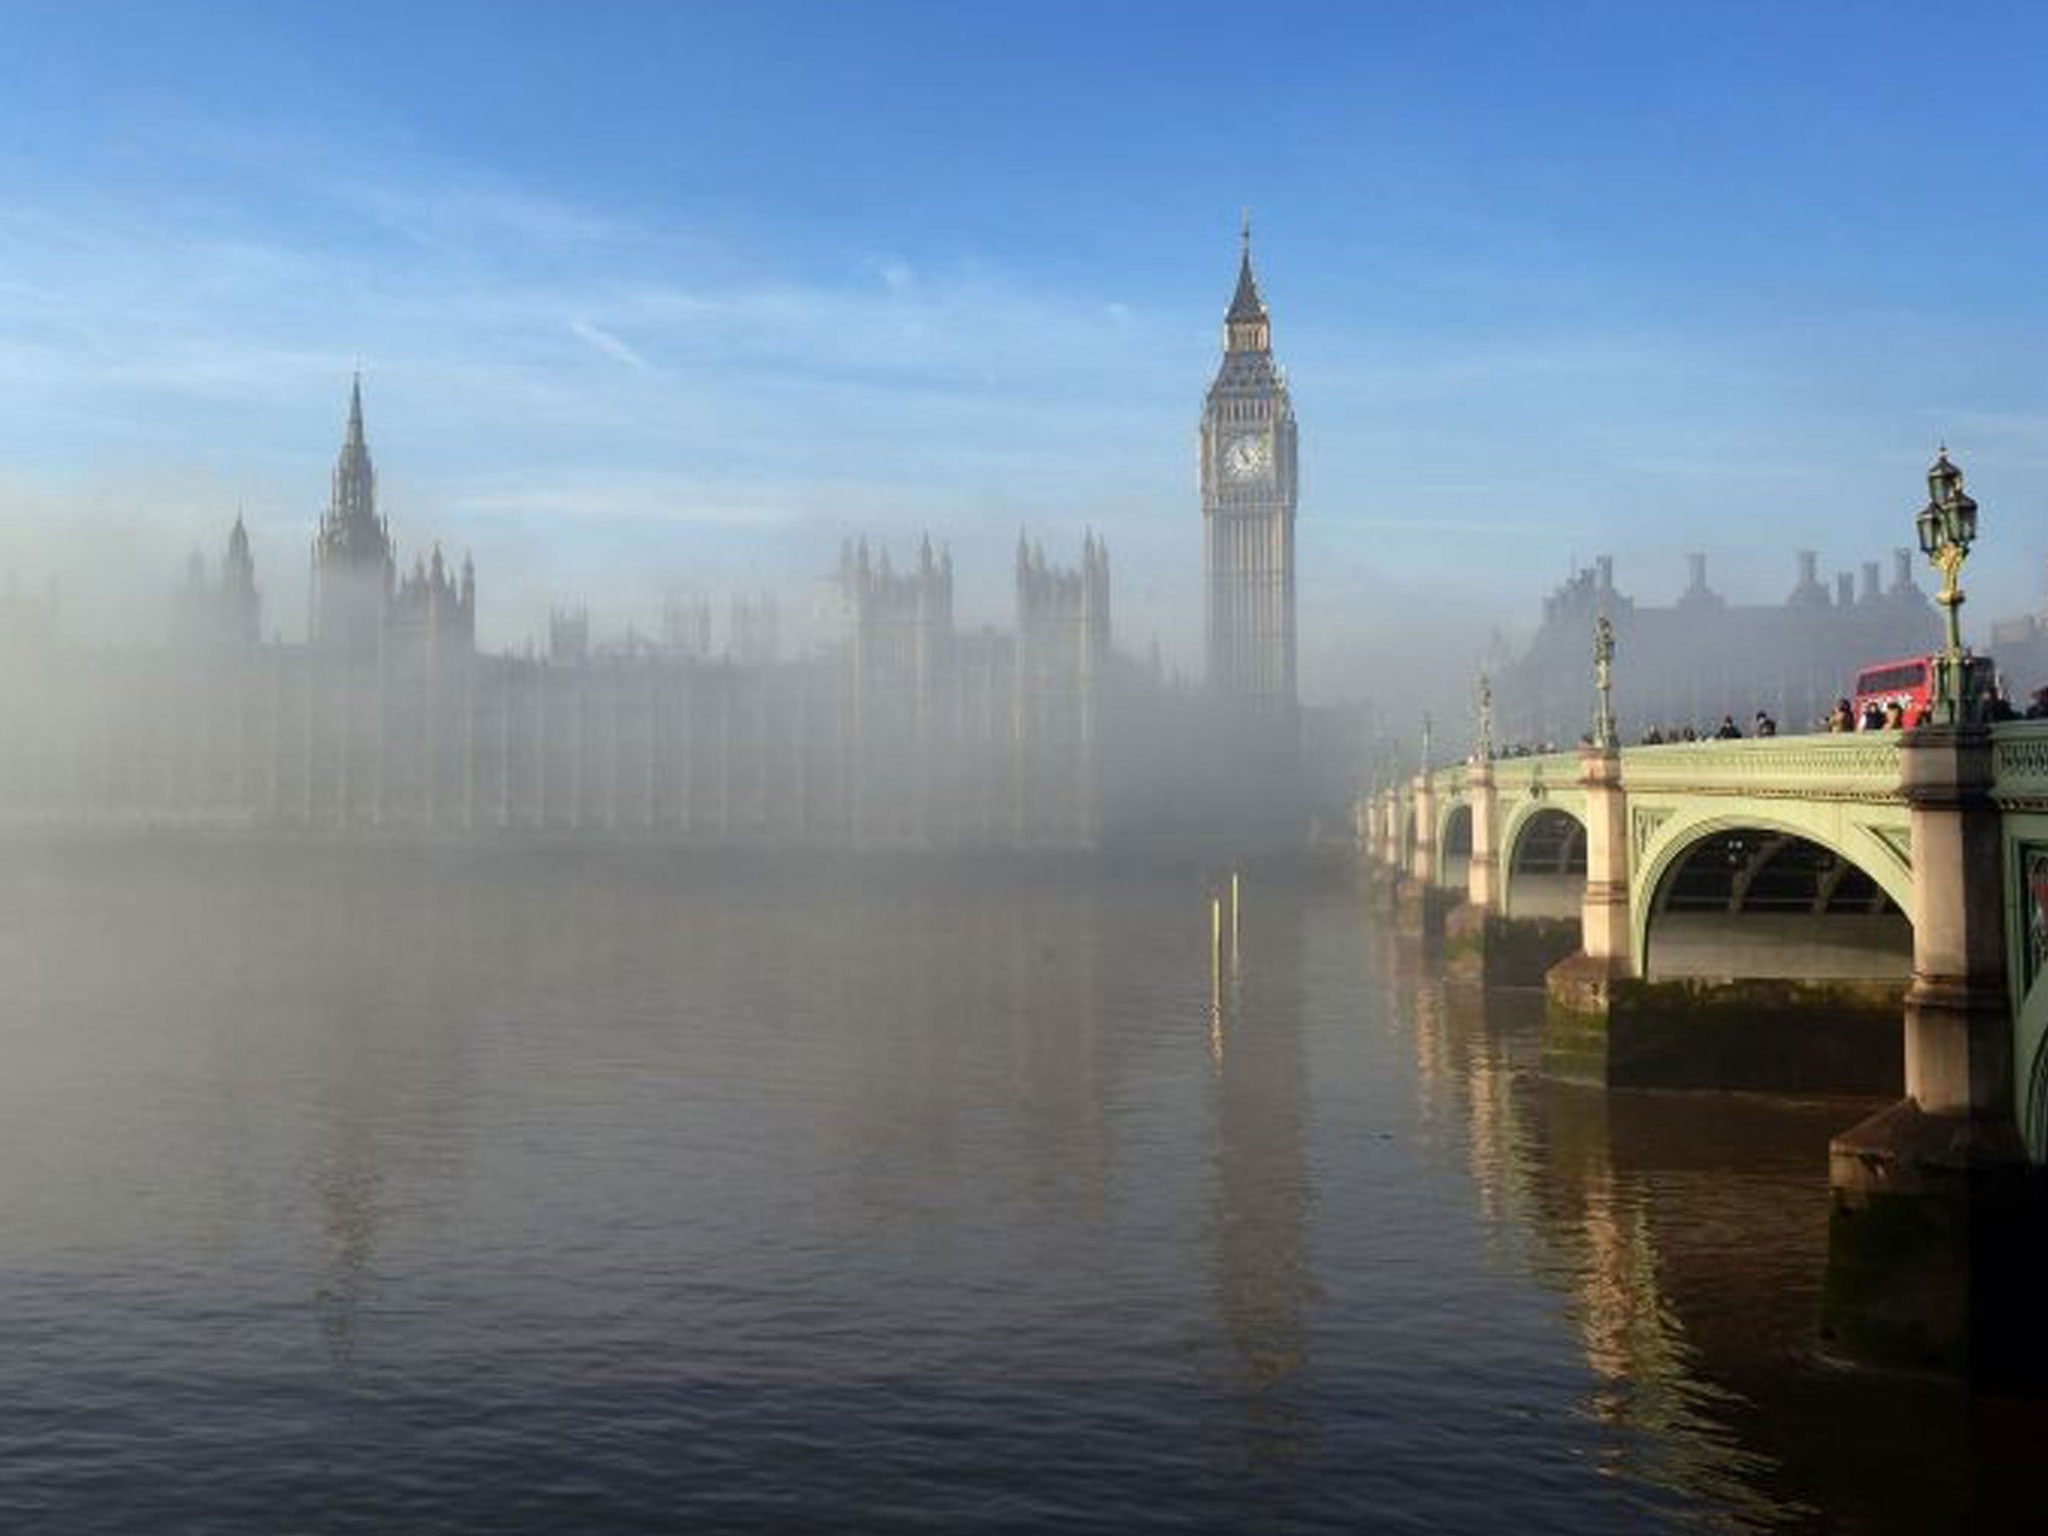 The Palace of Westminster shrouded in fog early this morning, central London